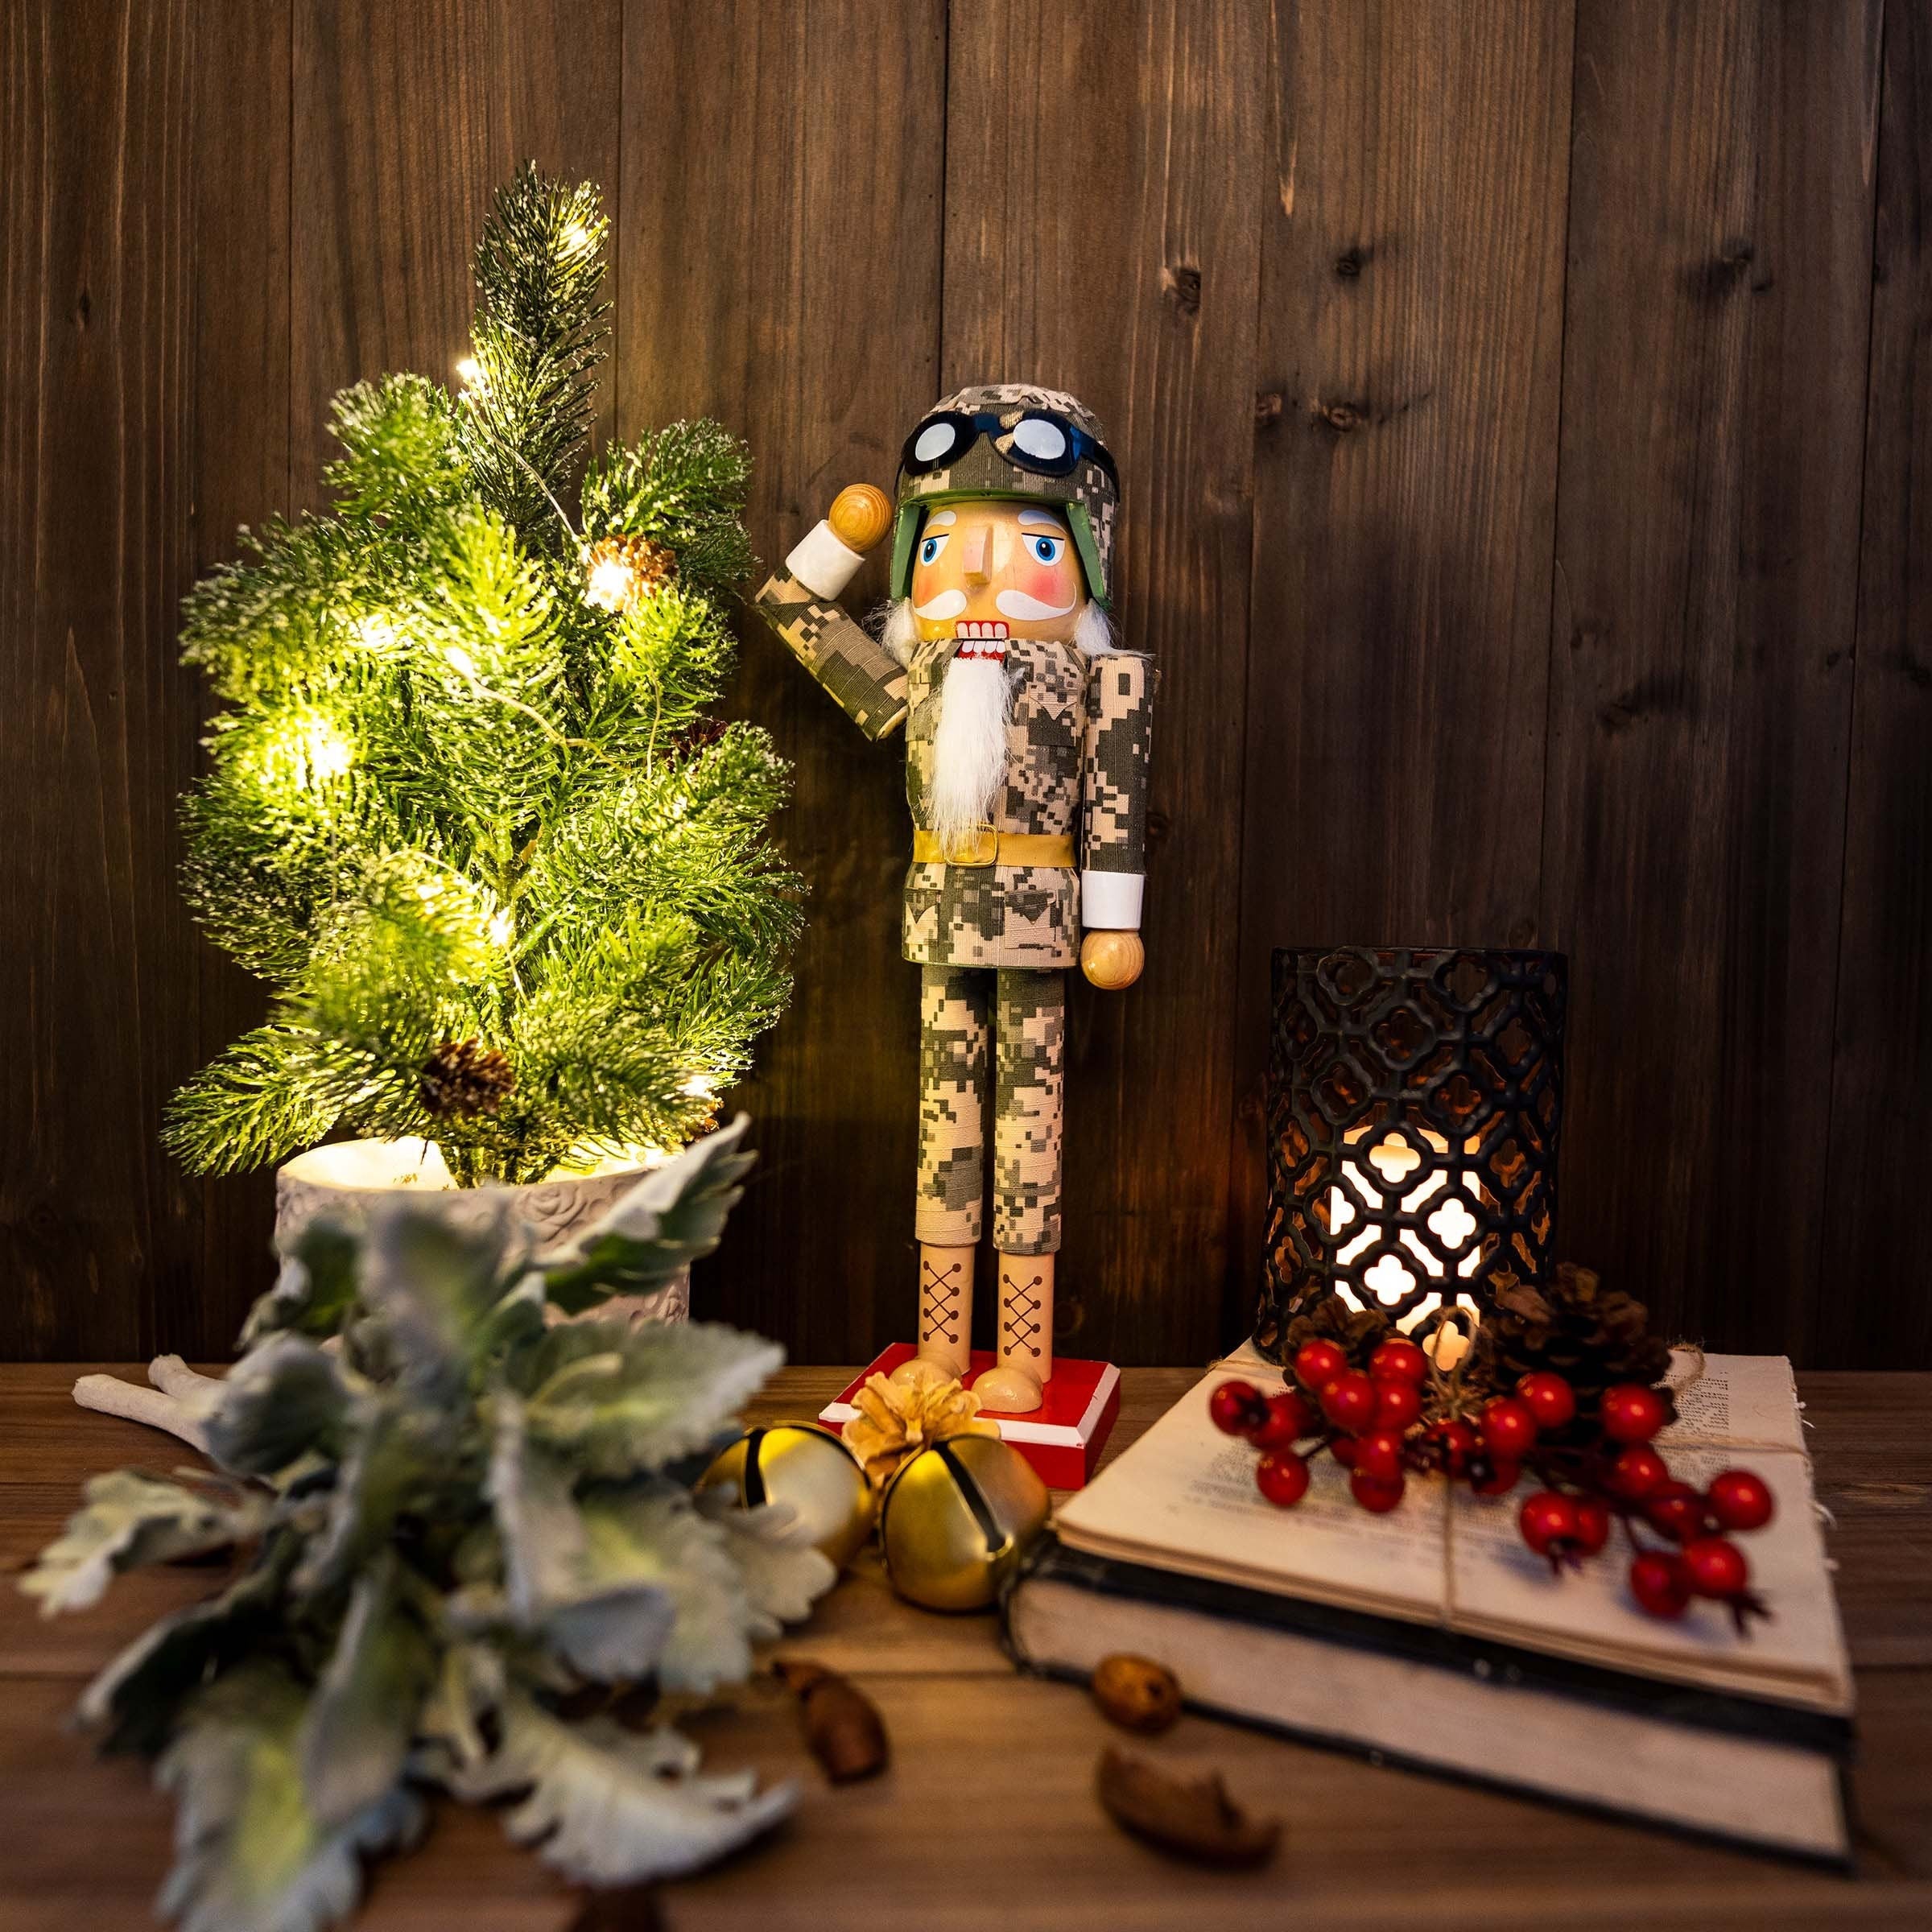 14-inch-Wooden-Nutcrackers-(Army-Soldier)-Christmas-Decoration-Figures-Nutcrackers